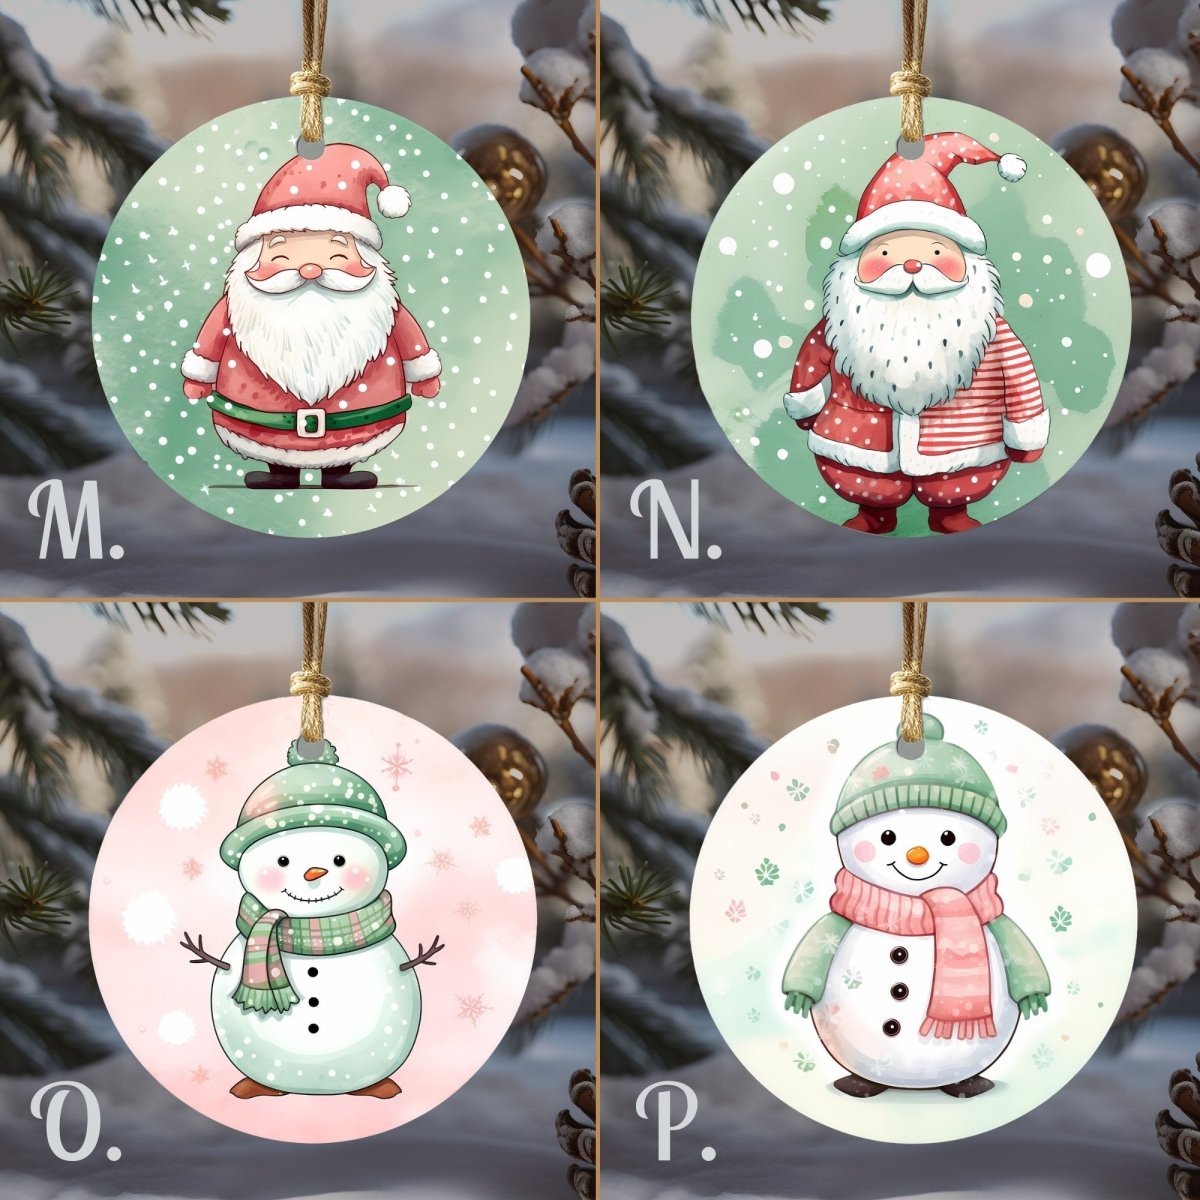 Cute Christmas Ornaments Set of 20 Round Ceramic Ornaments Printed Cute Animal Motifs Pink Mint Festive Christmas Tree Decoration - Everything Pixel